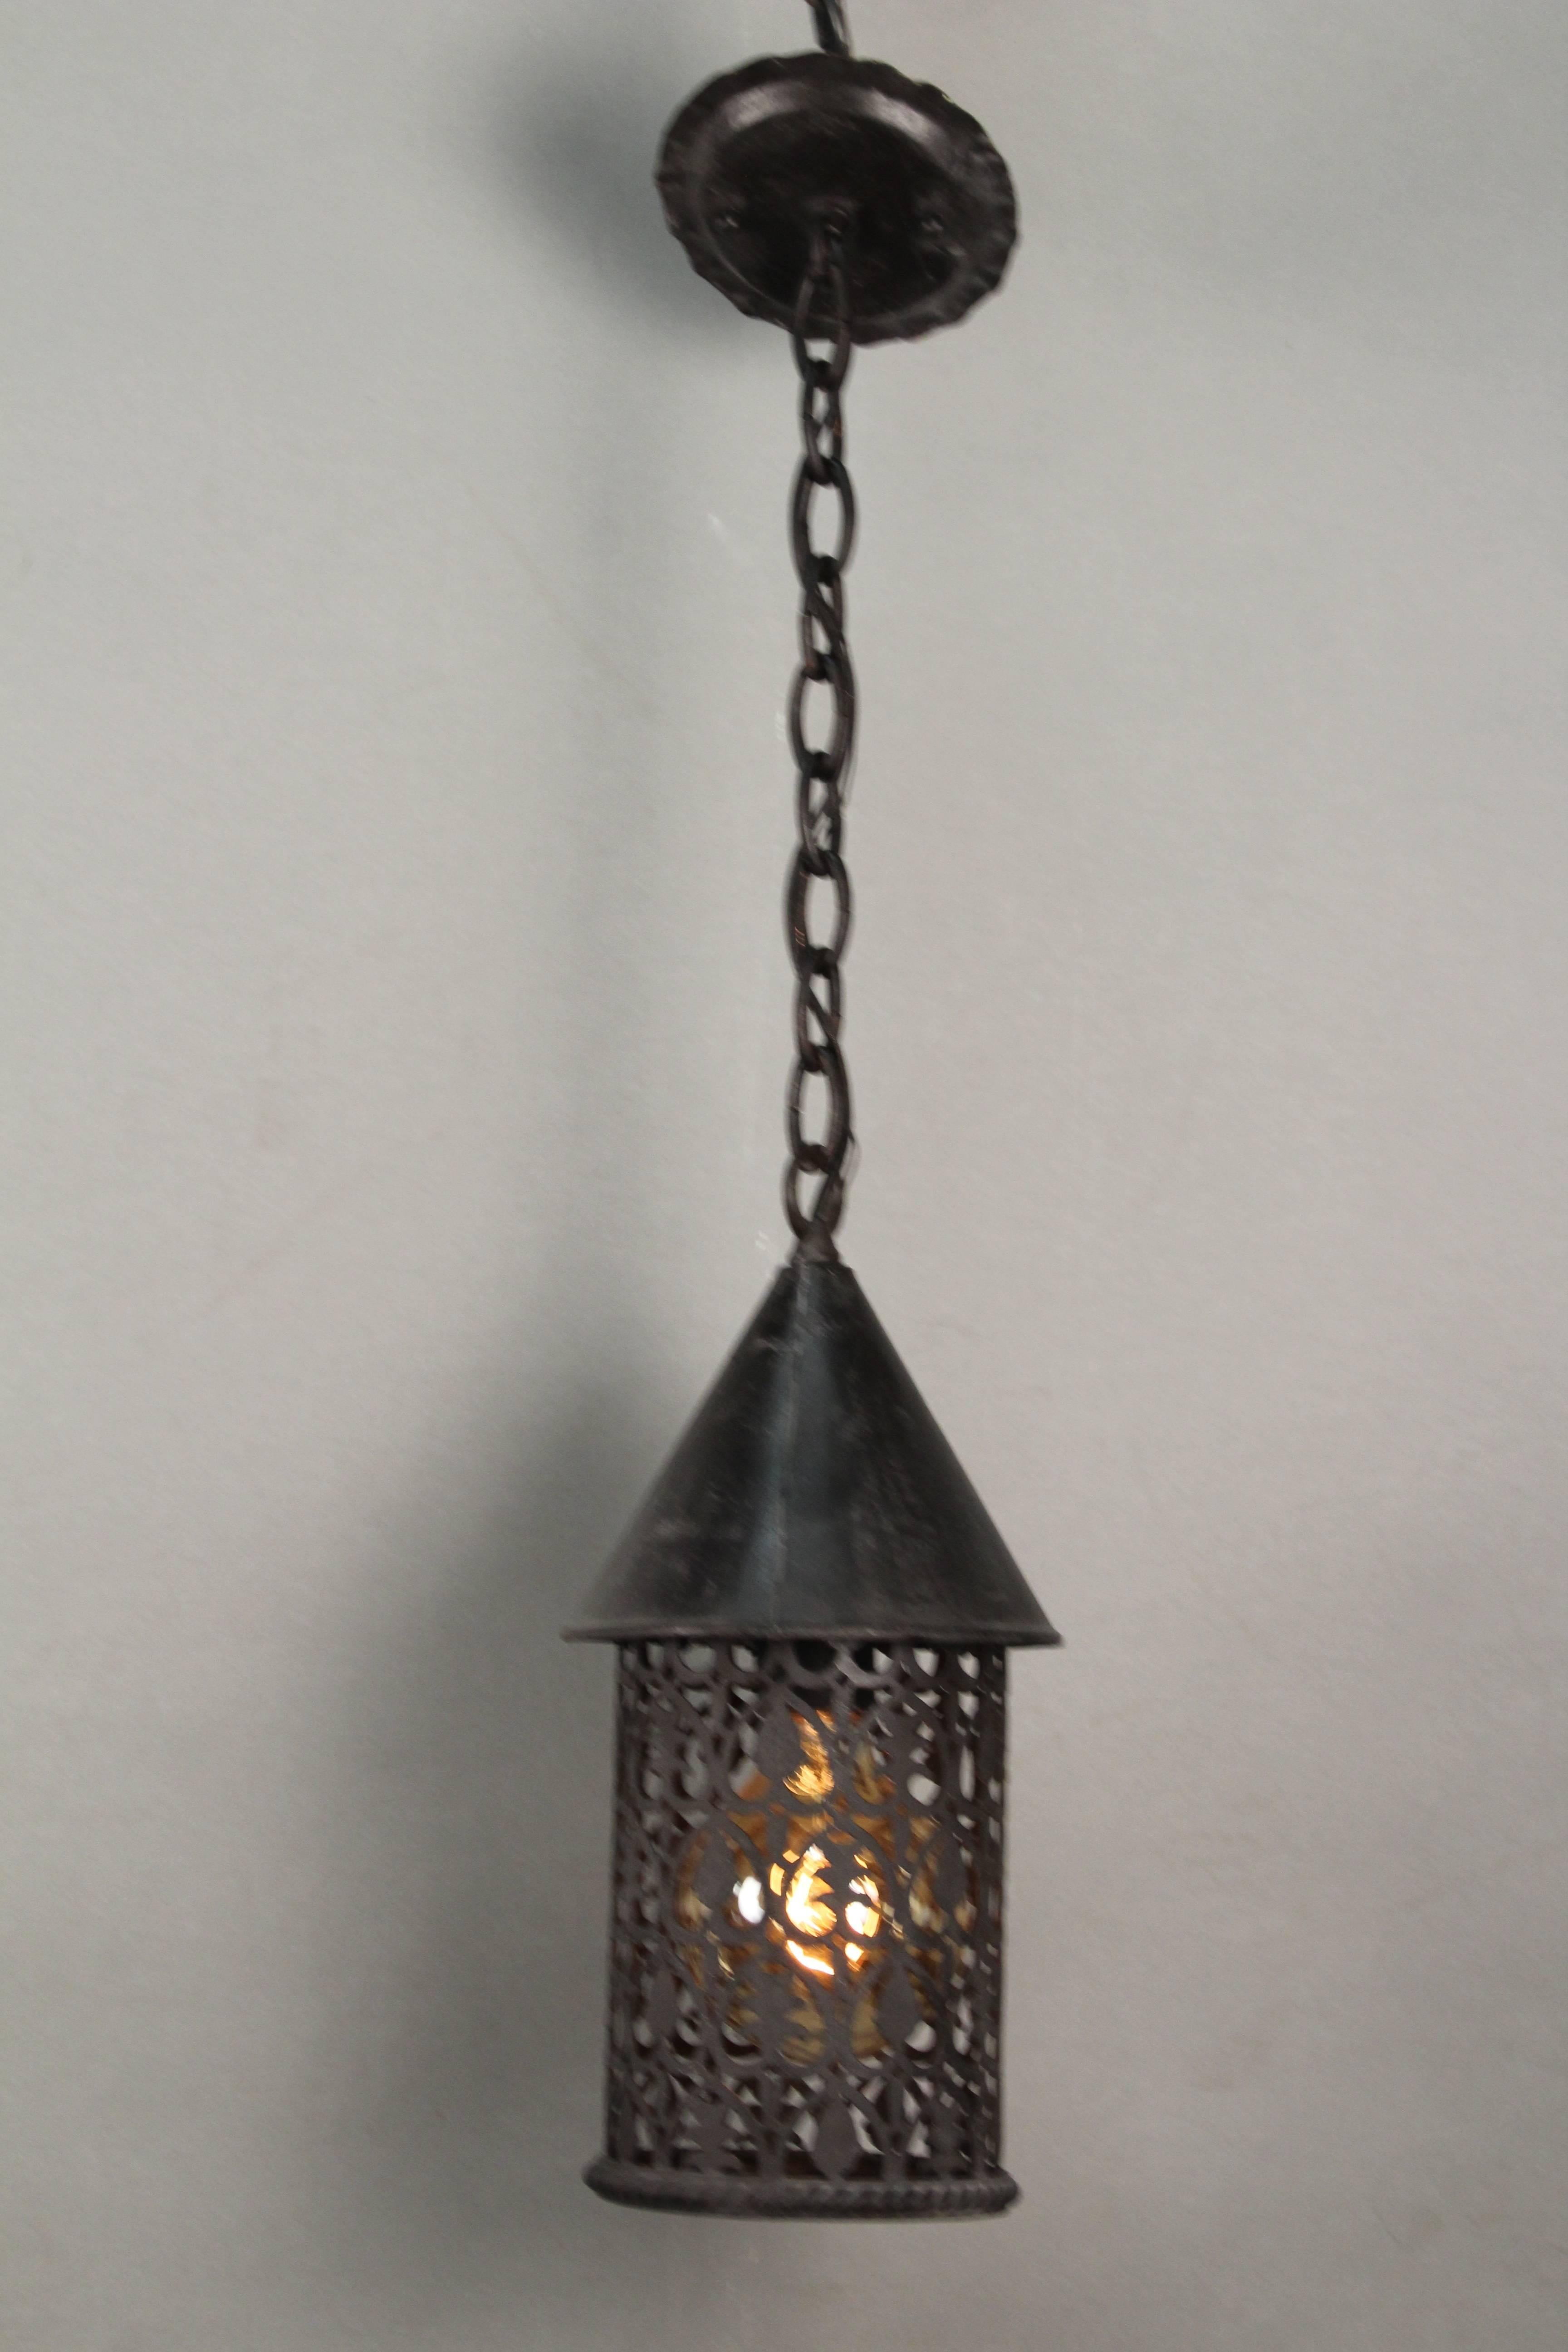 Lantern with cut-out. It will produce wonderful patterned shadows, circa 1920s.